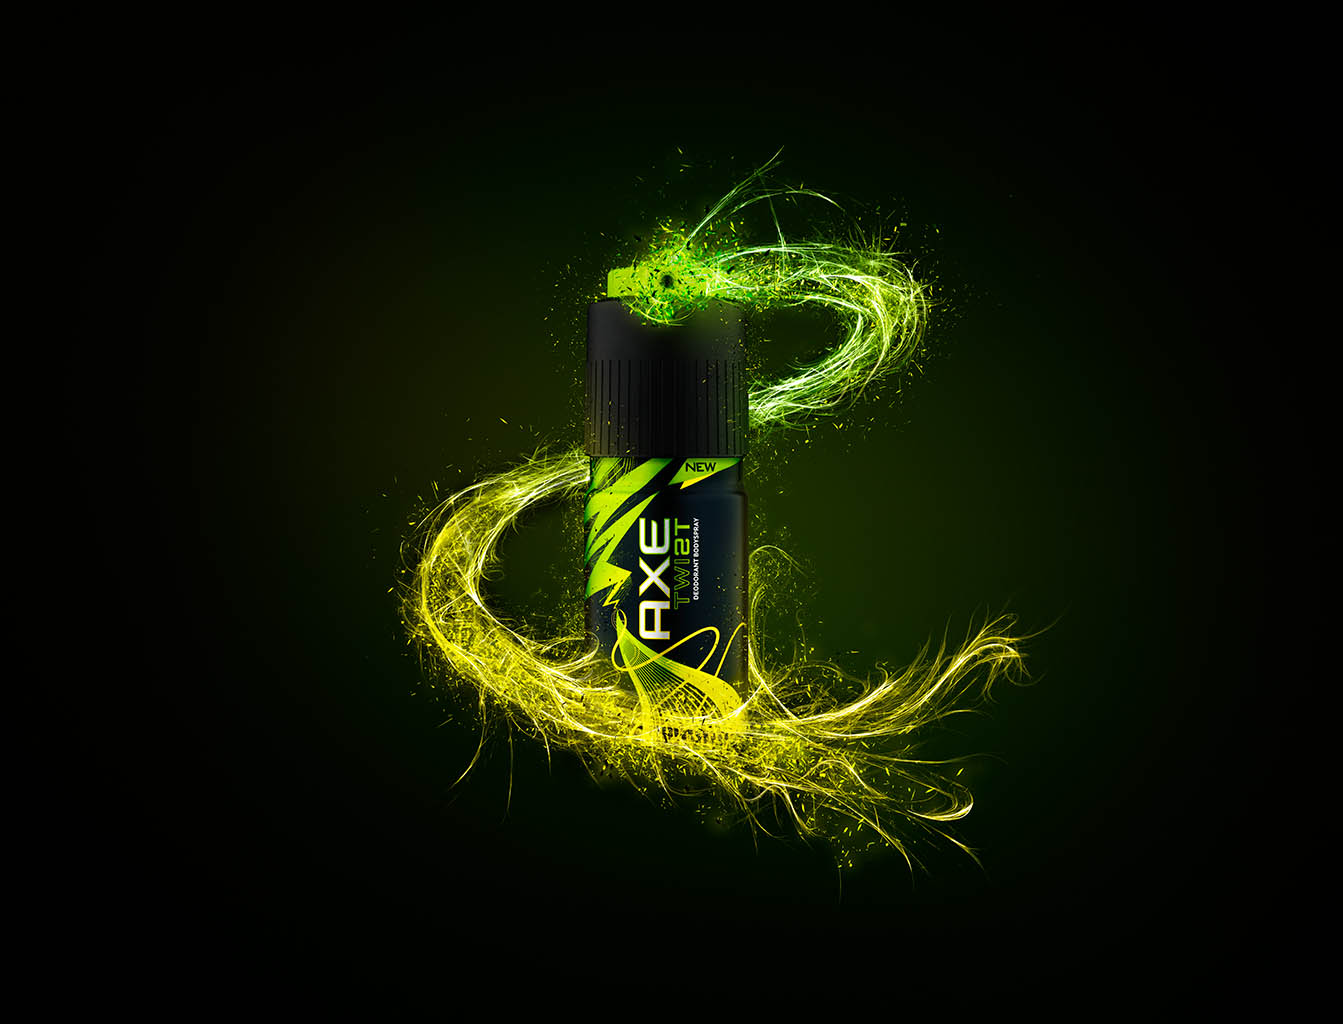 Advertising Still Life Product Photography of Axe Twist deodorand bodyspray by Packshot Factory